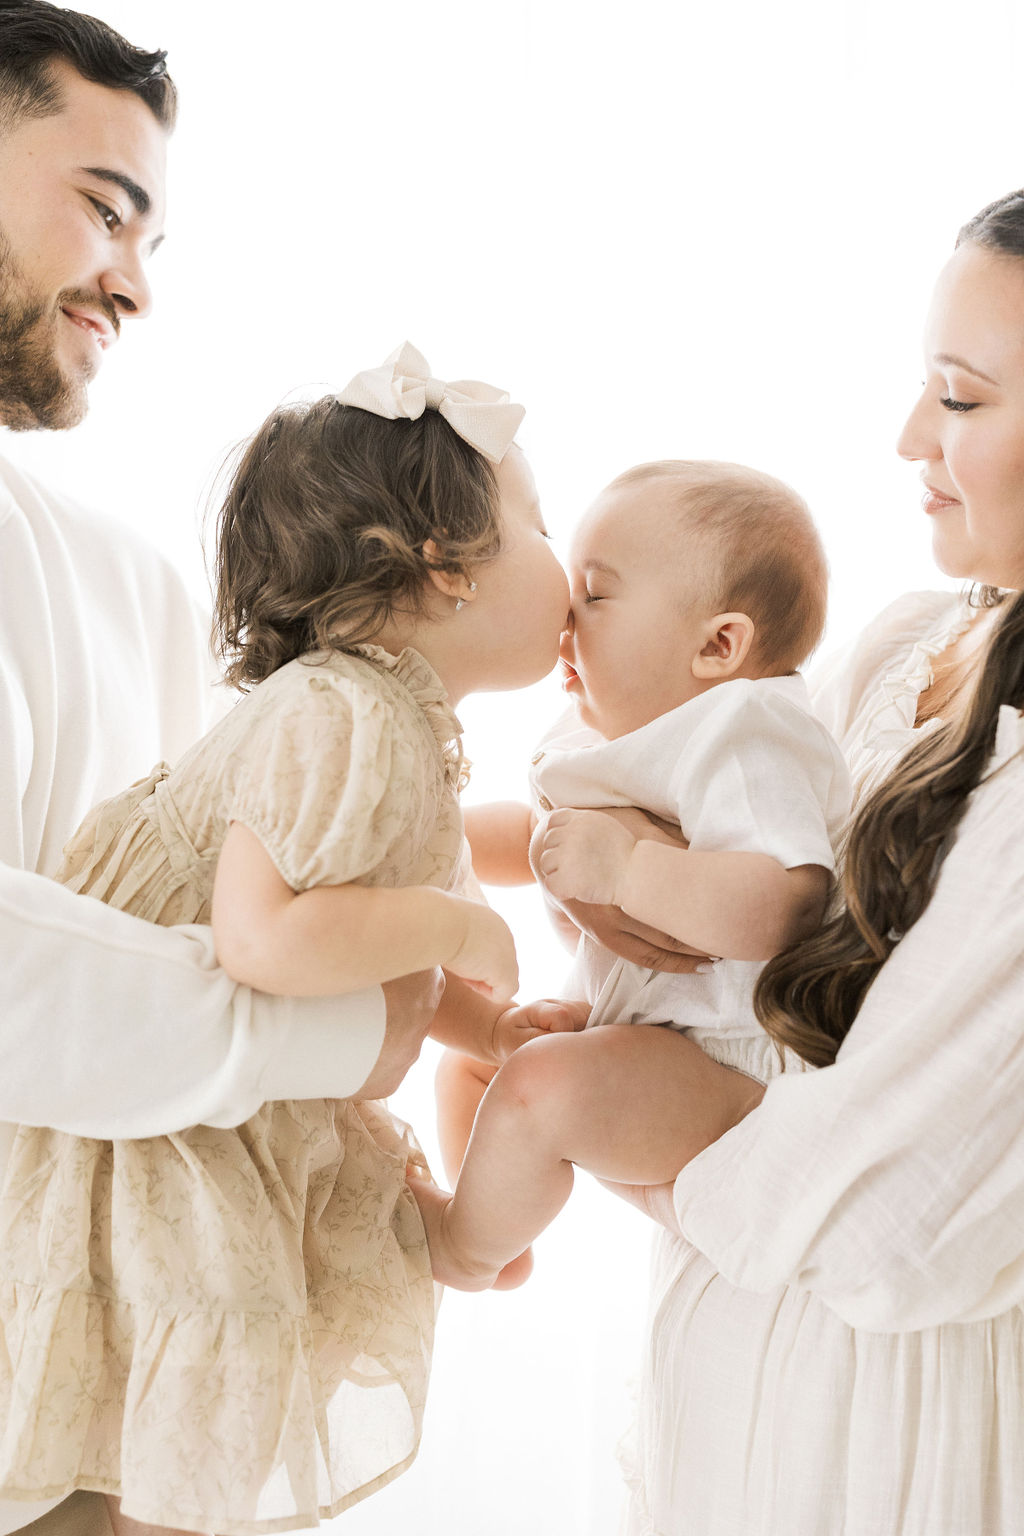 Toddler girl in a beige dress kisses her newborn sibbling's nose while both being held by parents